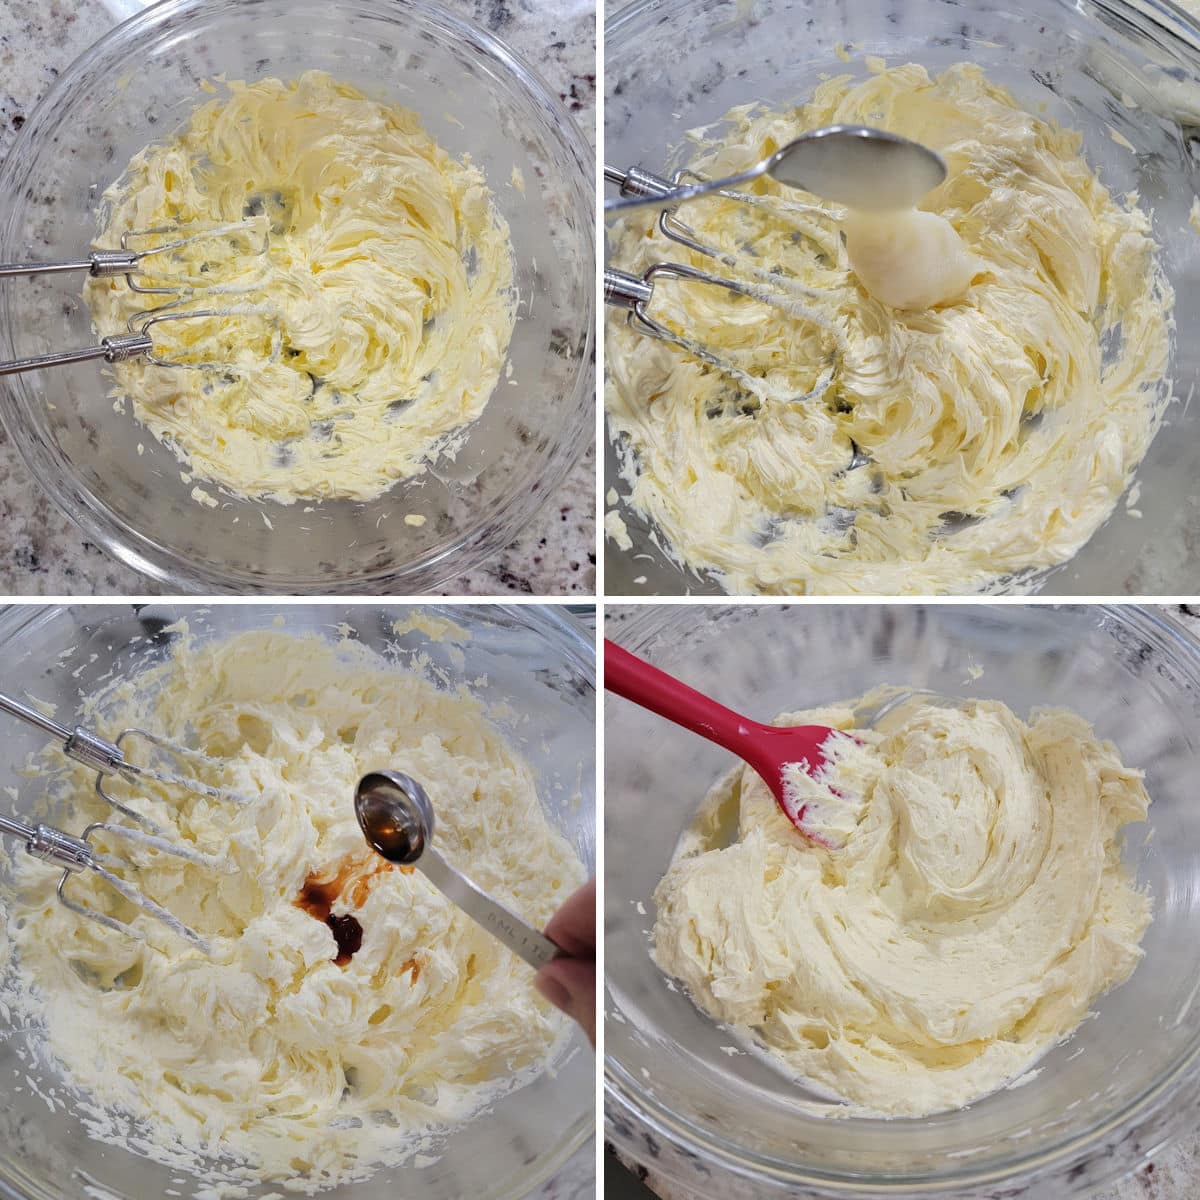 Whipping ermine frosting in a glass bowl.